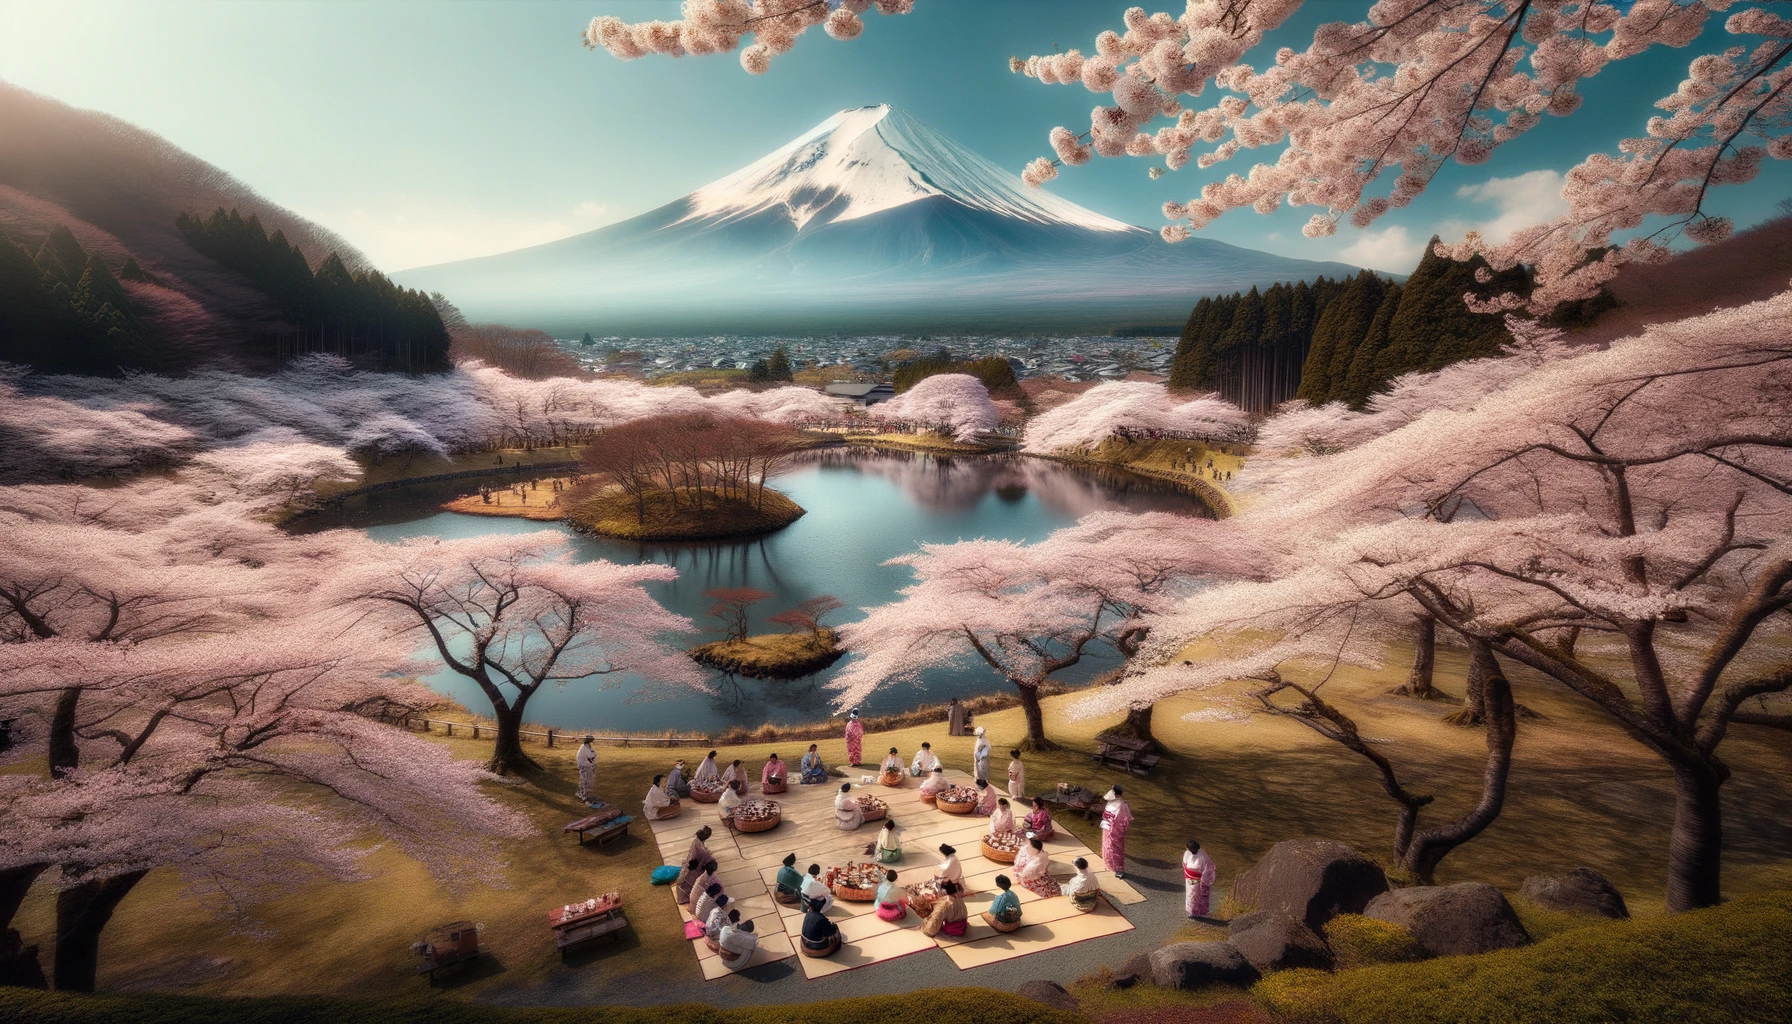 Photo of a picturesque scene in Japan during sakura season. The foreground is adorned with cherry trees, their branches laden with pale pink blossoms that seem to paint the landscape. Nestled in the distance is Mount Fuji, its snow-capped peak standing in stark contrast to the softness of the blossoms. A tranquil pond sits nearby, its waters mirroring the sakura trees and the mountain's reflection. Local folks, wearing traditional attire, spread out picnic mats and enjoy the beauty of nature, creating a harmonious blend of culture and nature.